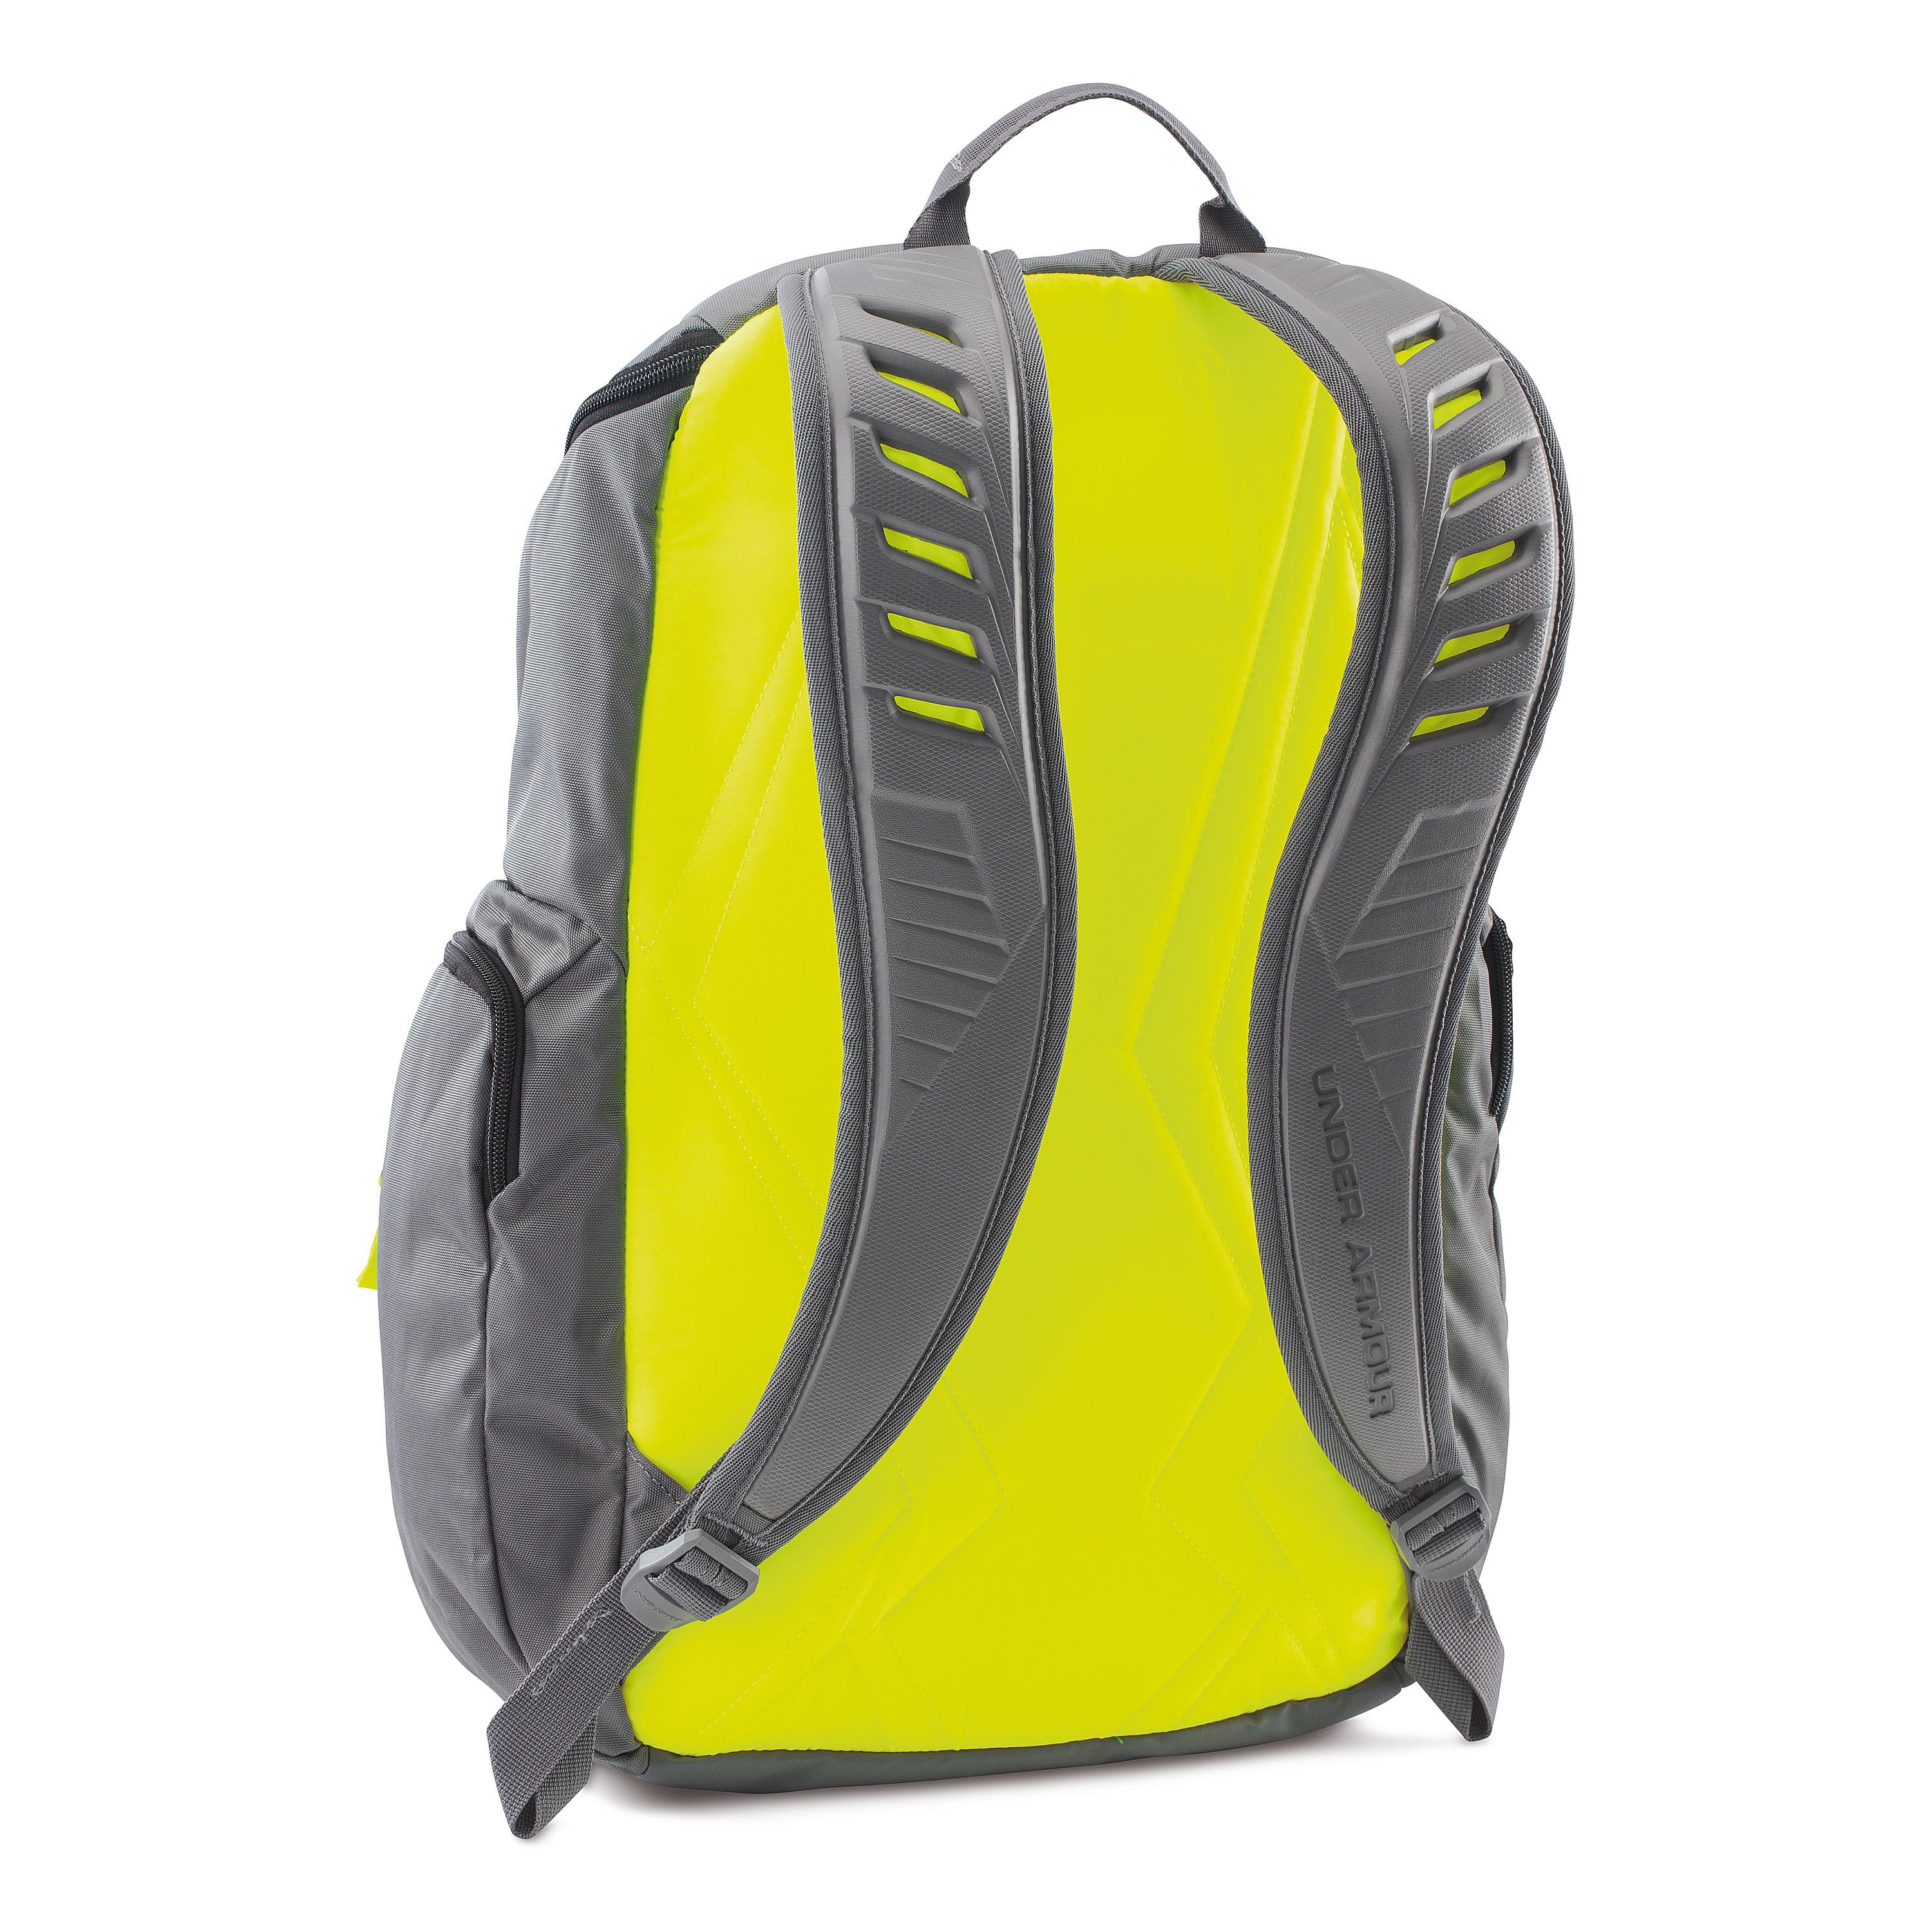 Under Armour Undeniable Backpack II grey/yellow | Under Armour ...